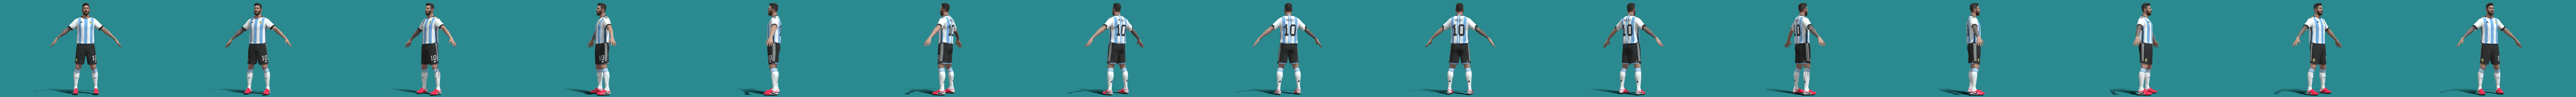 3D model Argentina Football Jersey FIFA World Cup 2022 VR / AR / low-poly